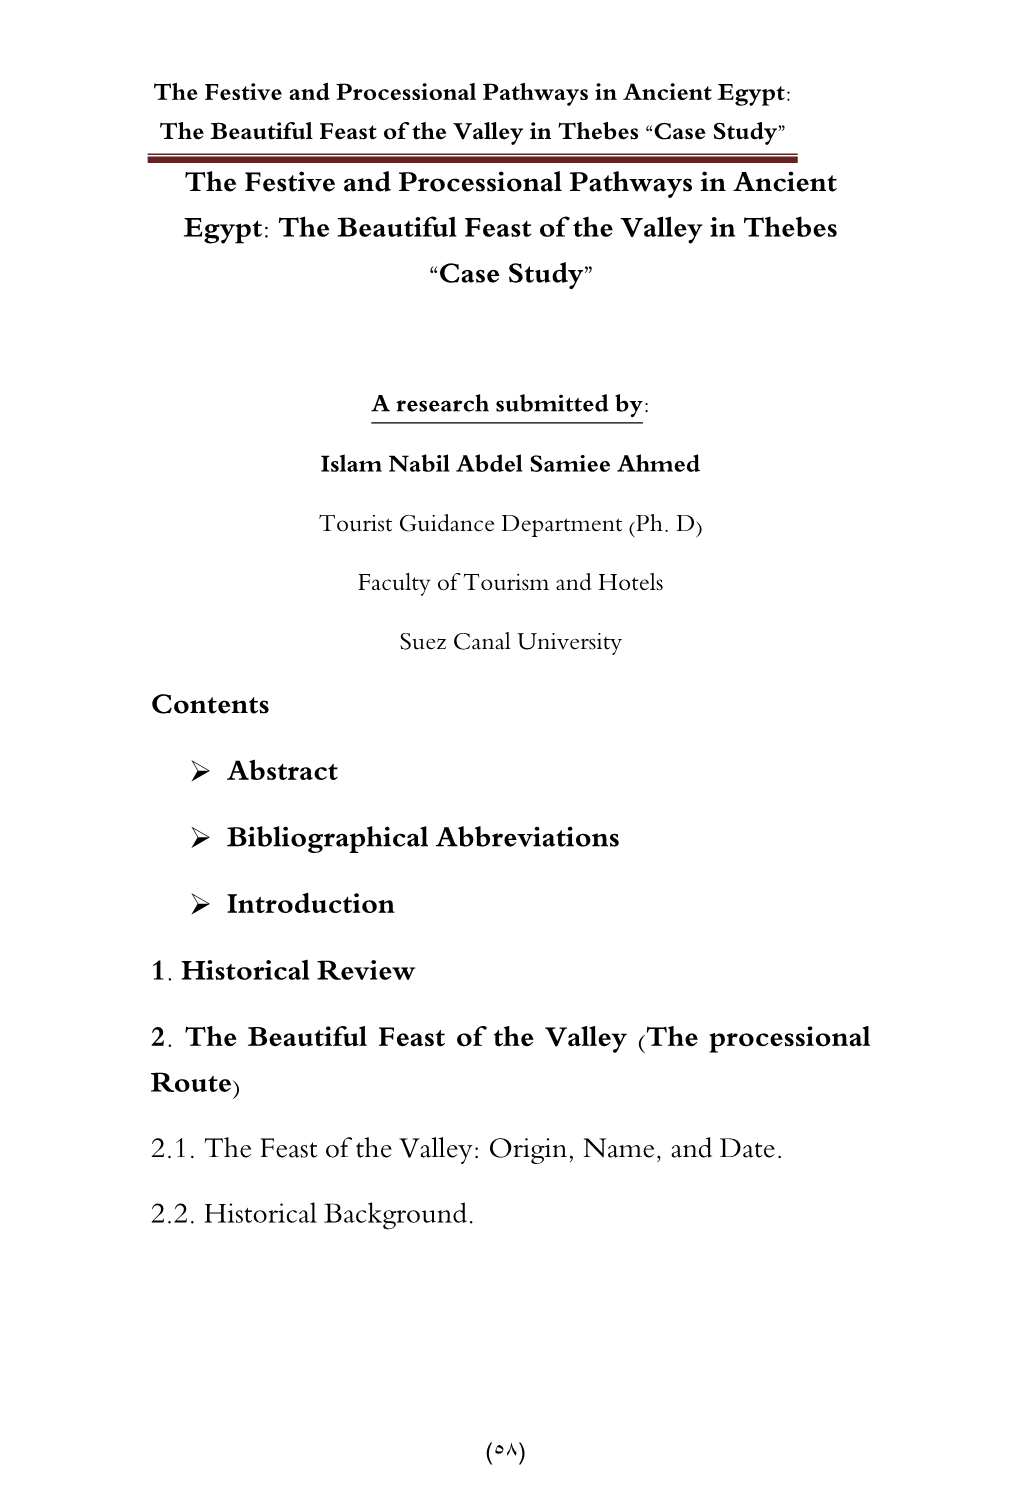 The Beautiful Feast of the Valley in Thebes “Case Study” Contents